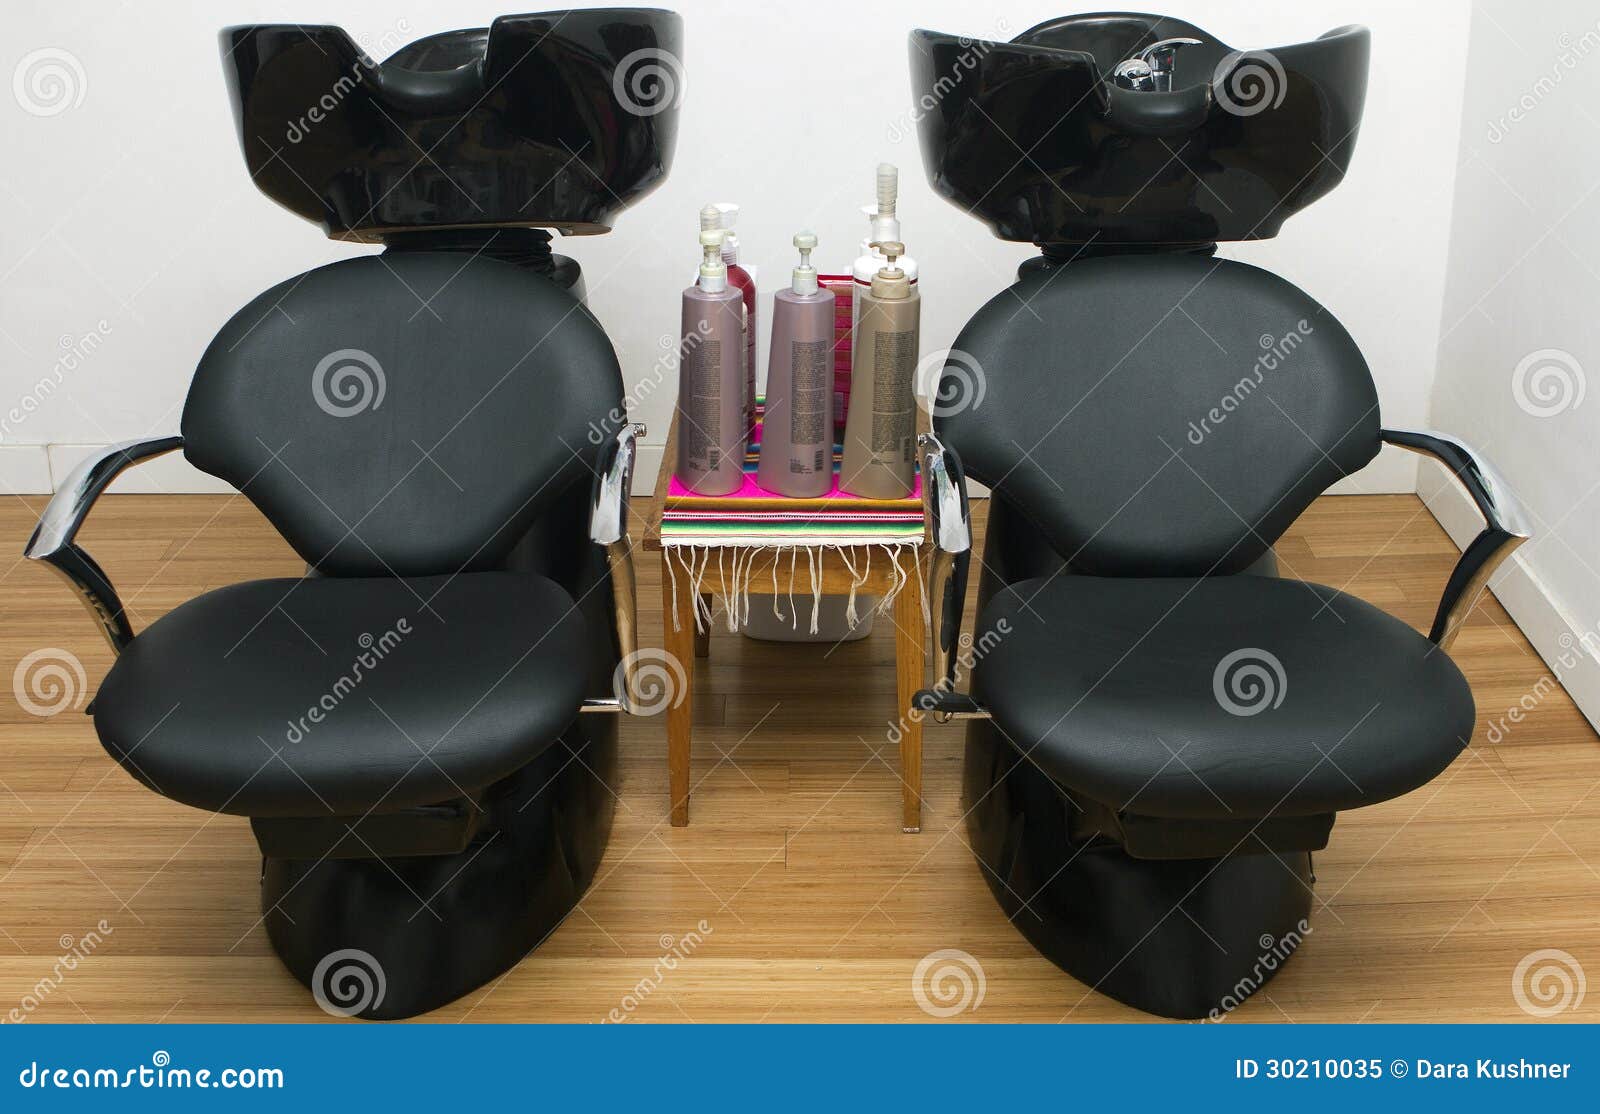 Hair Salon Sinks And Chairs Stock Image Image Of Beauty